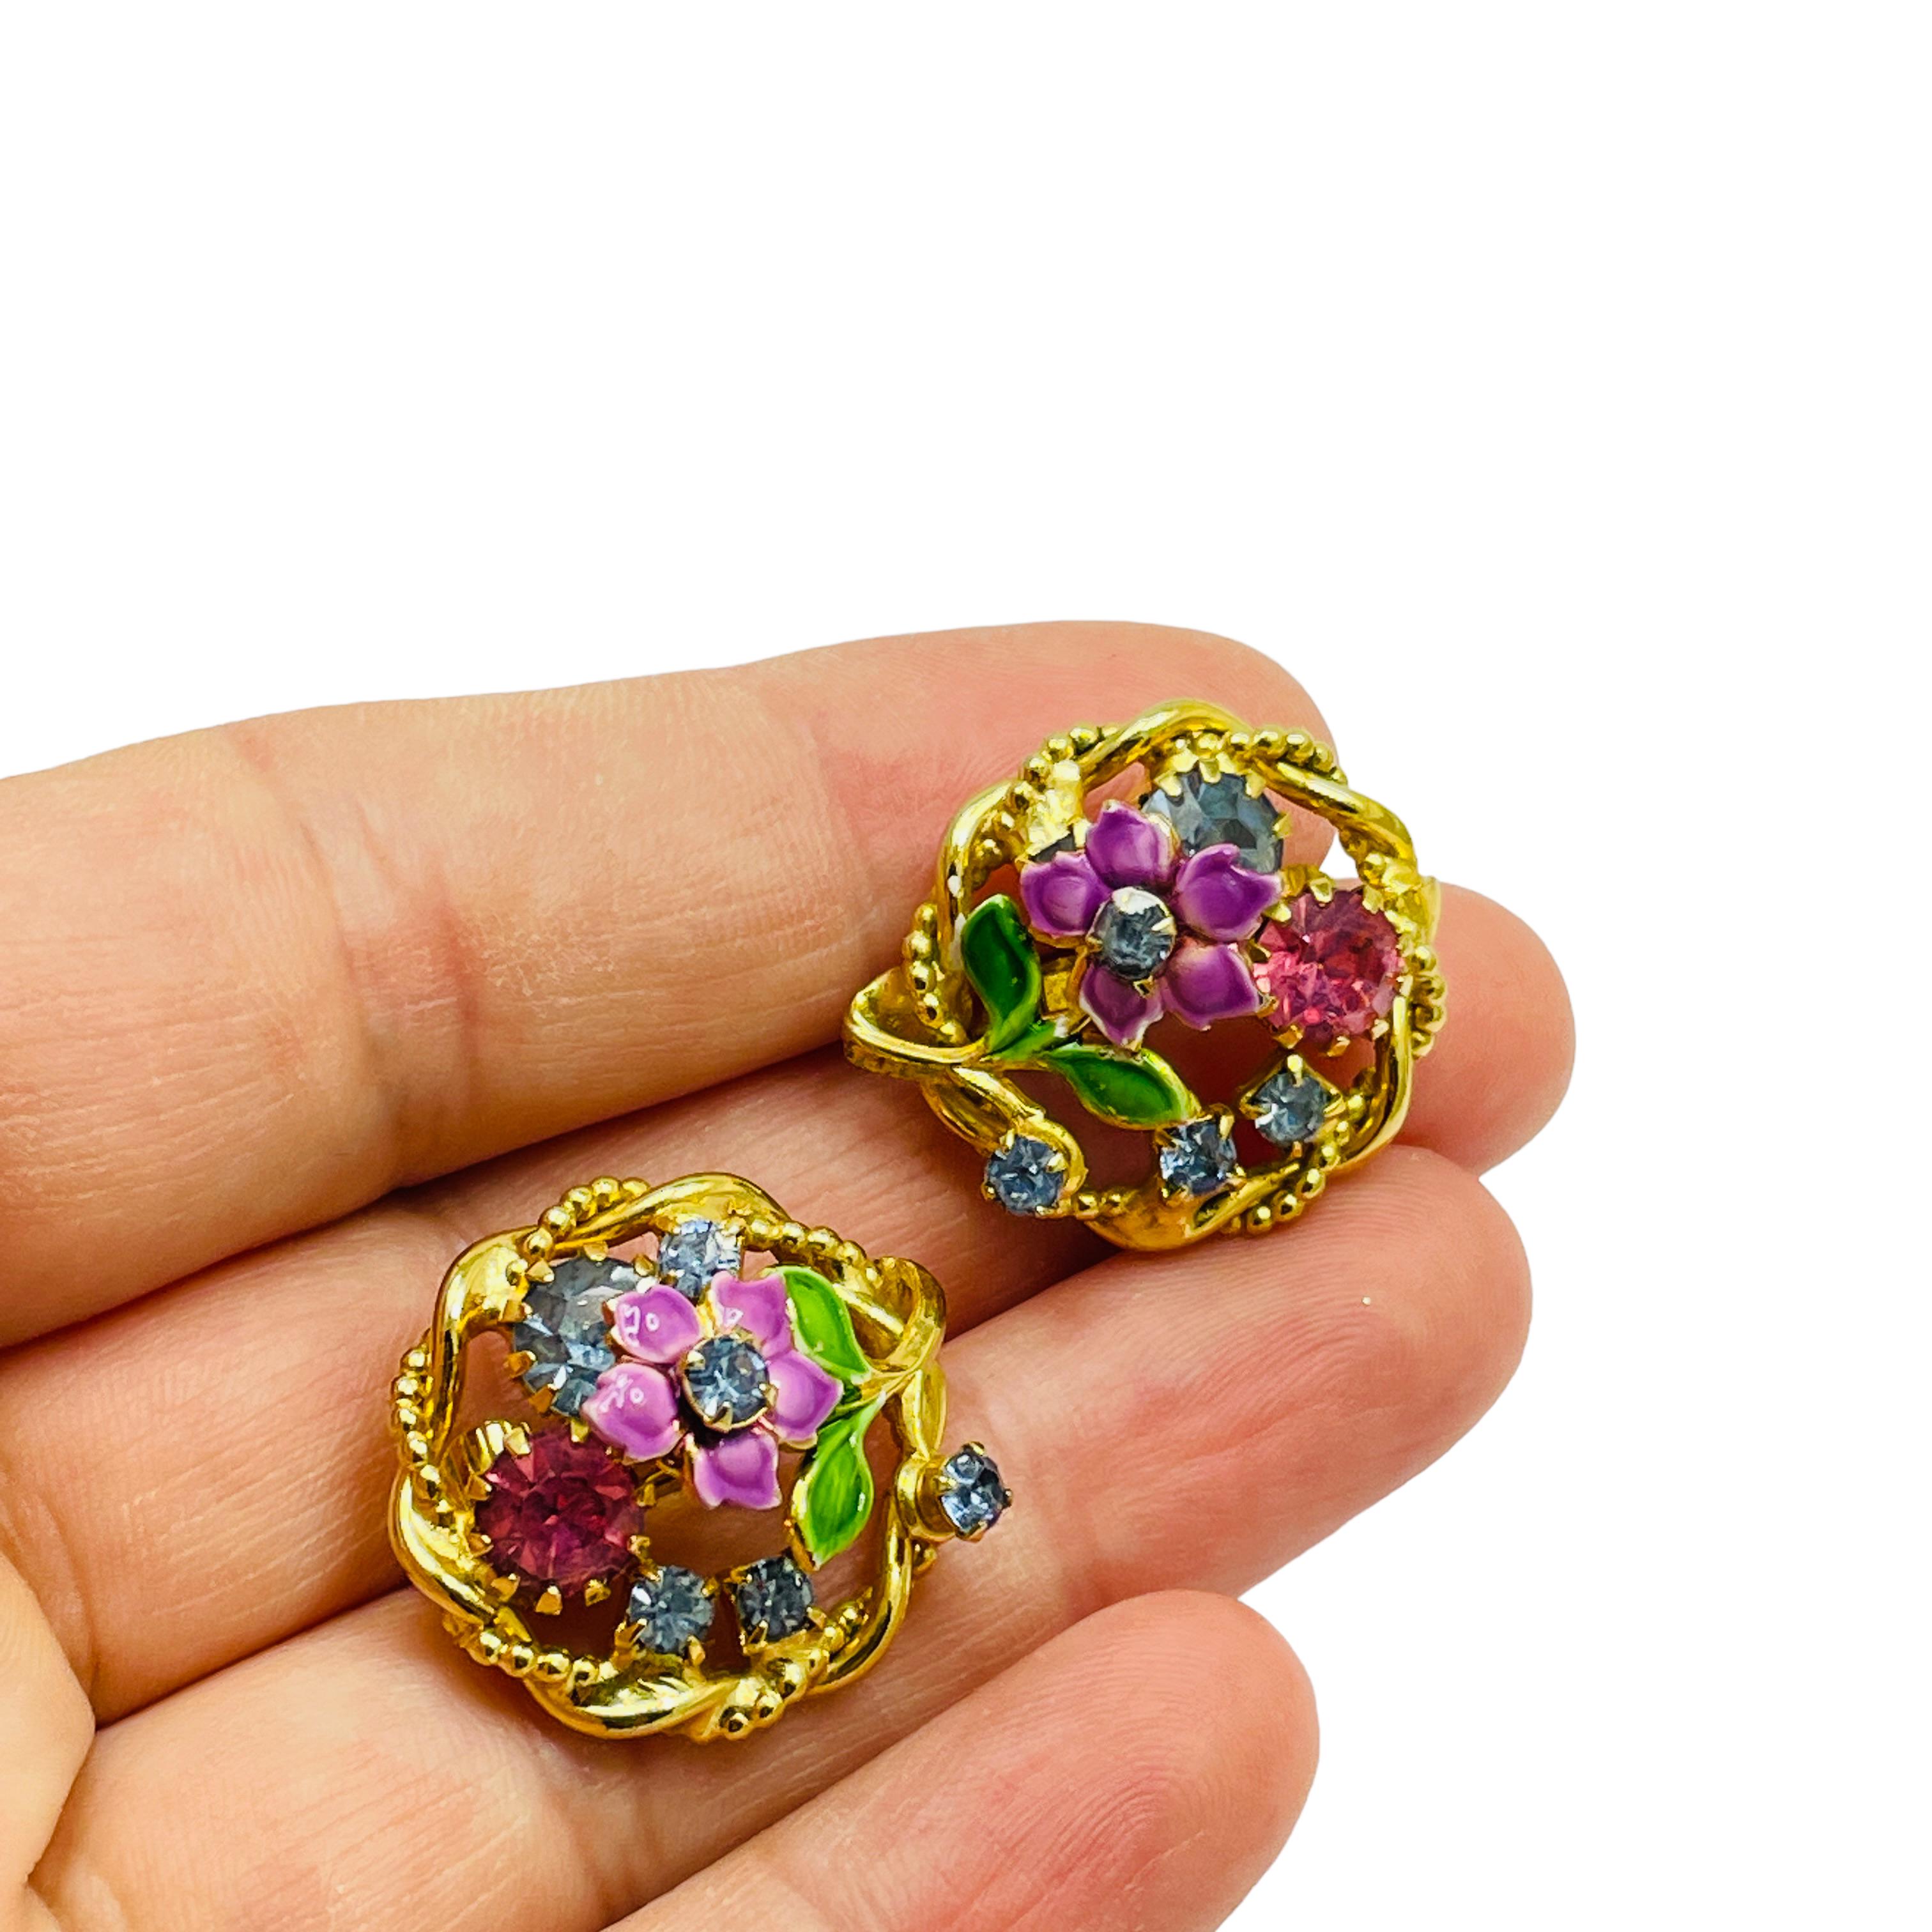 DETAILS

• unsigned

• gold tone with enamel and rhinestones

• vintage designer clip on earrings

MEASUREMENTS

• 0.88